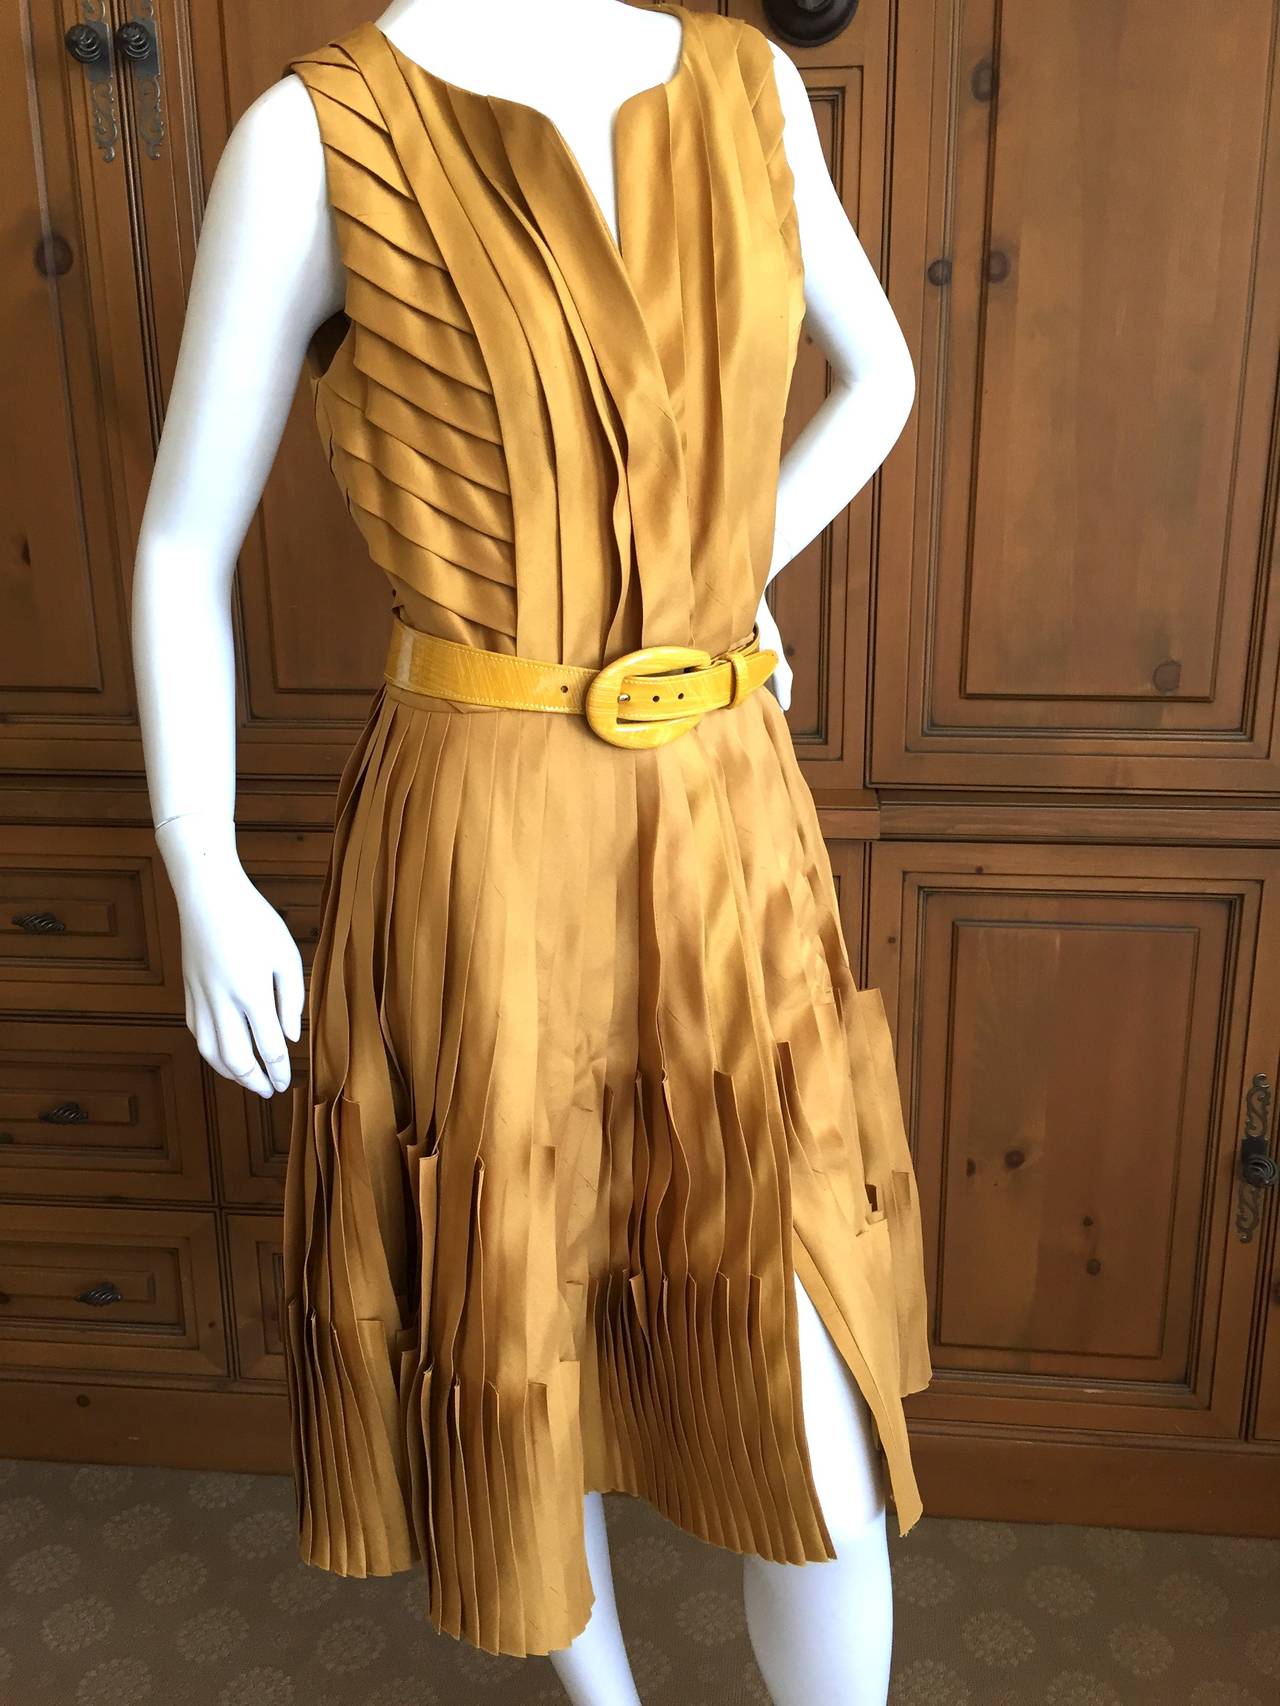 Oscar de la Renta Delightful Vintage Silk Pleated Dress.
Comes with matching patent leather belt
This is really pretty, so ladylike. 
The color is mustard like silk, but has a green cast in some light
Size 8

Bust 38